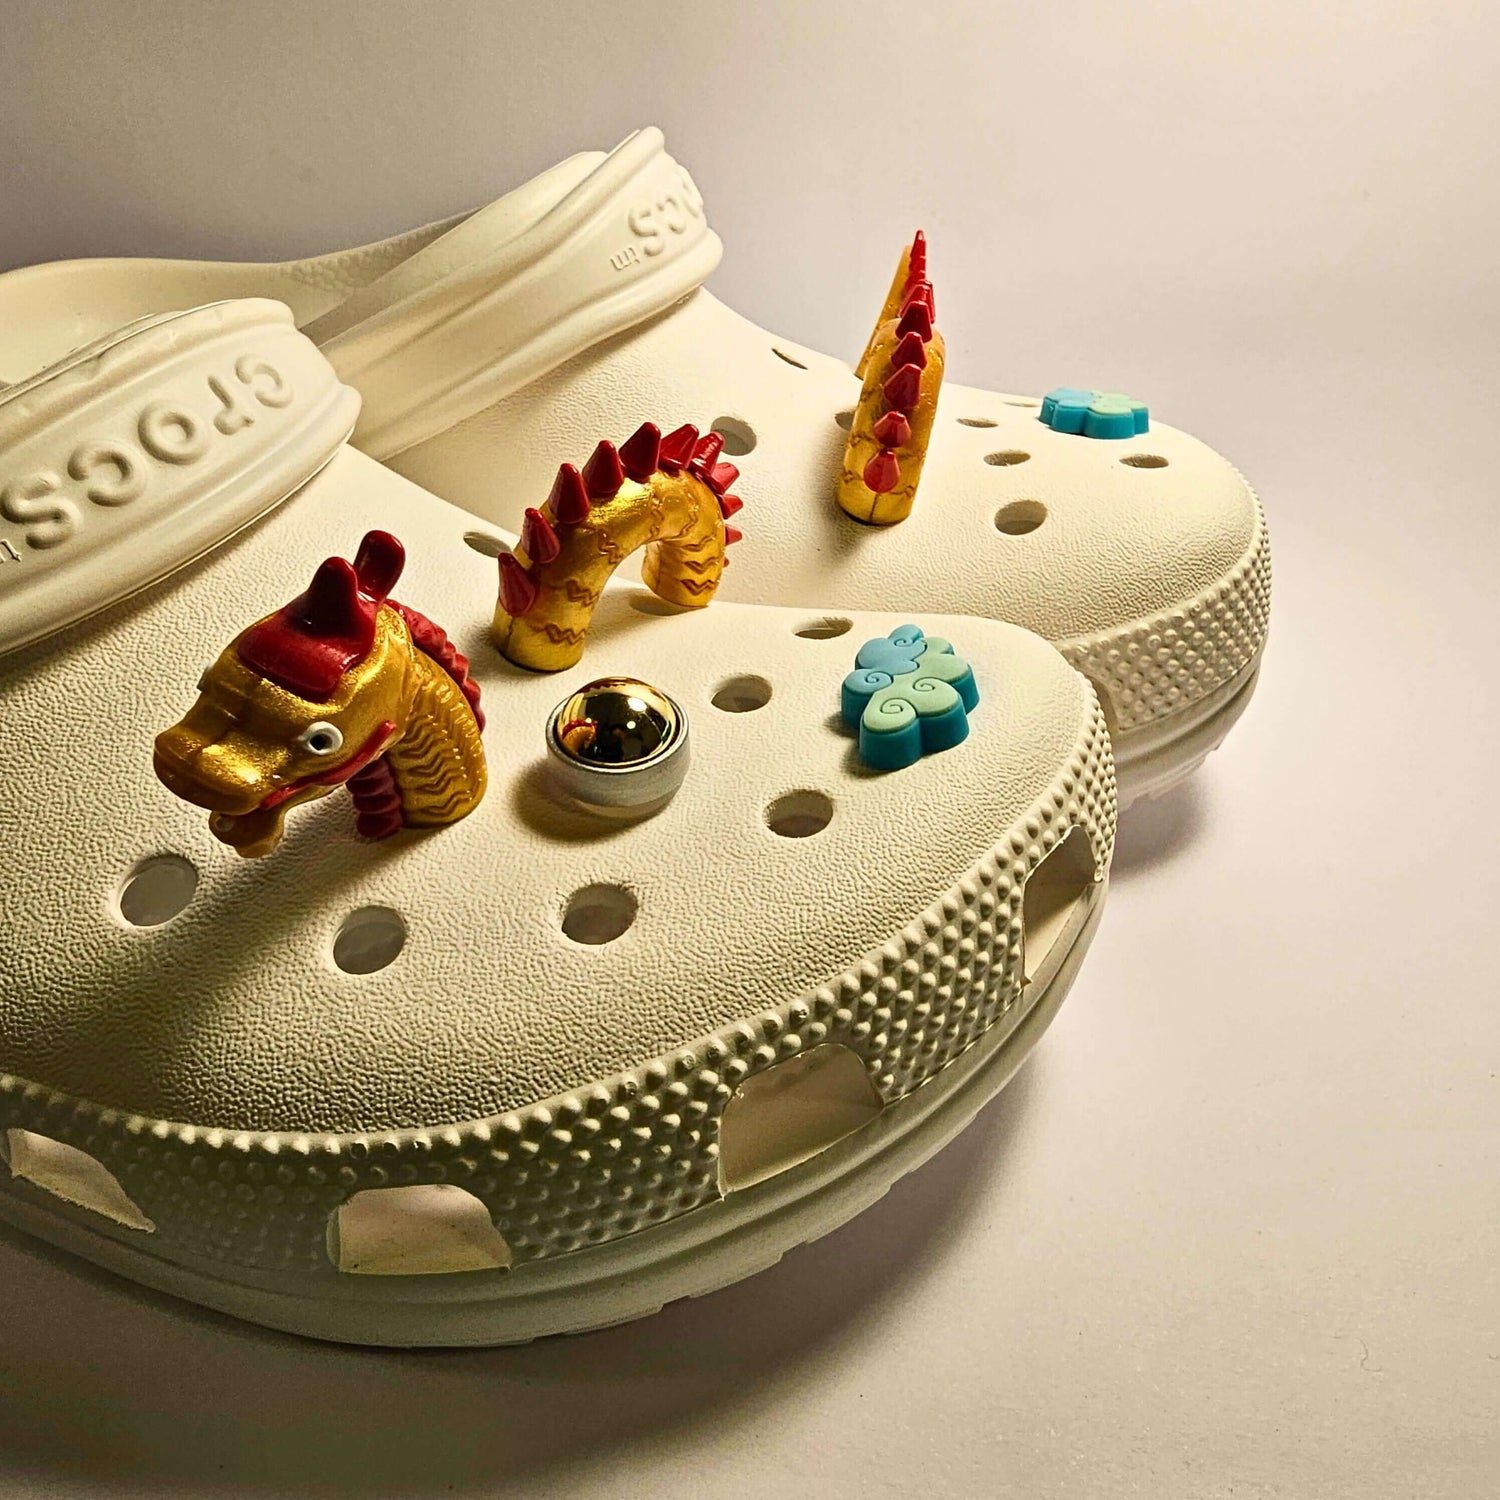 A collection of croc charms which form a flying dragon and a pearl - red and gold